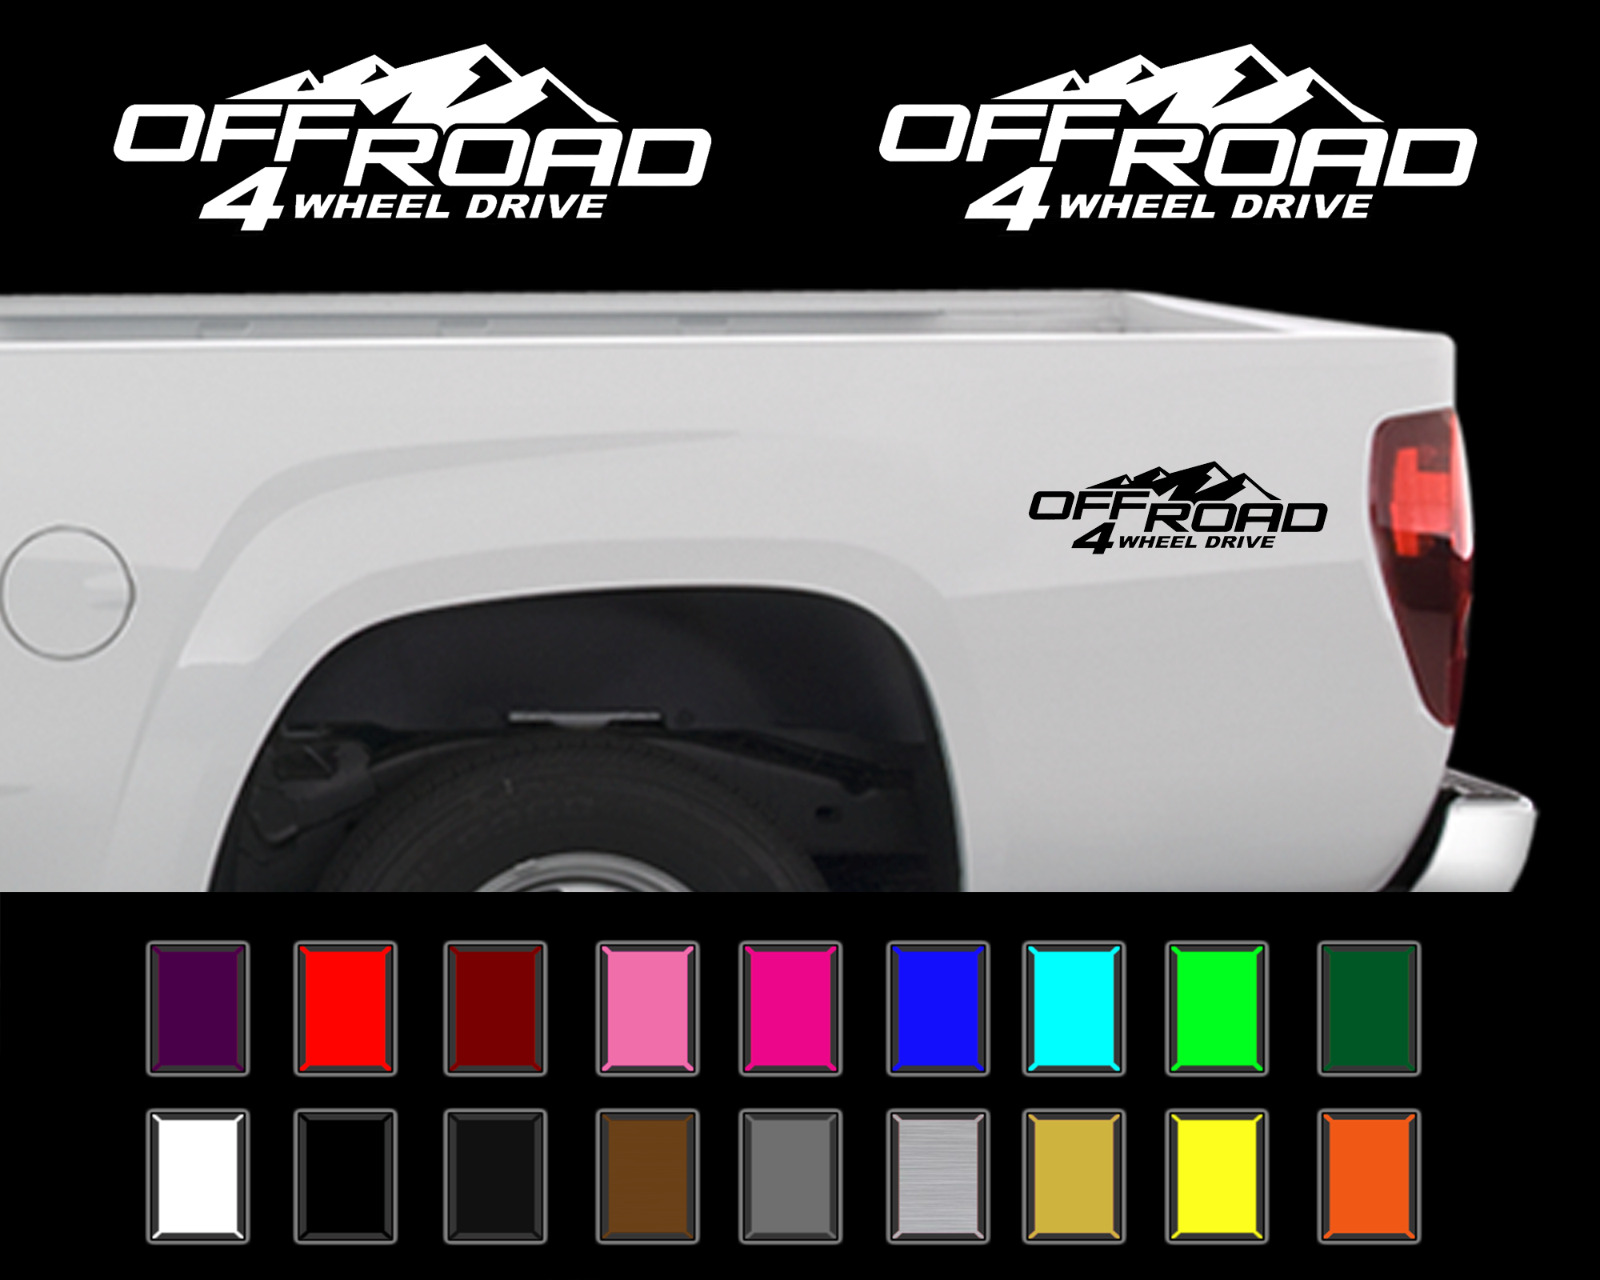 Off Road Decal Set Fits: 2004 - 2012 Chevy Colorado GMC Canyon Vinyl Stickers